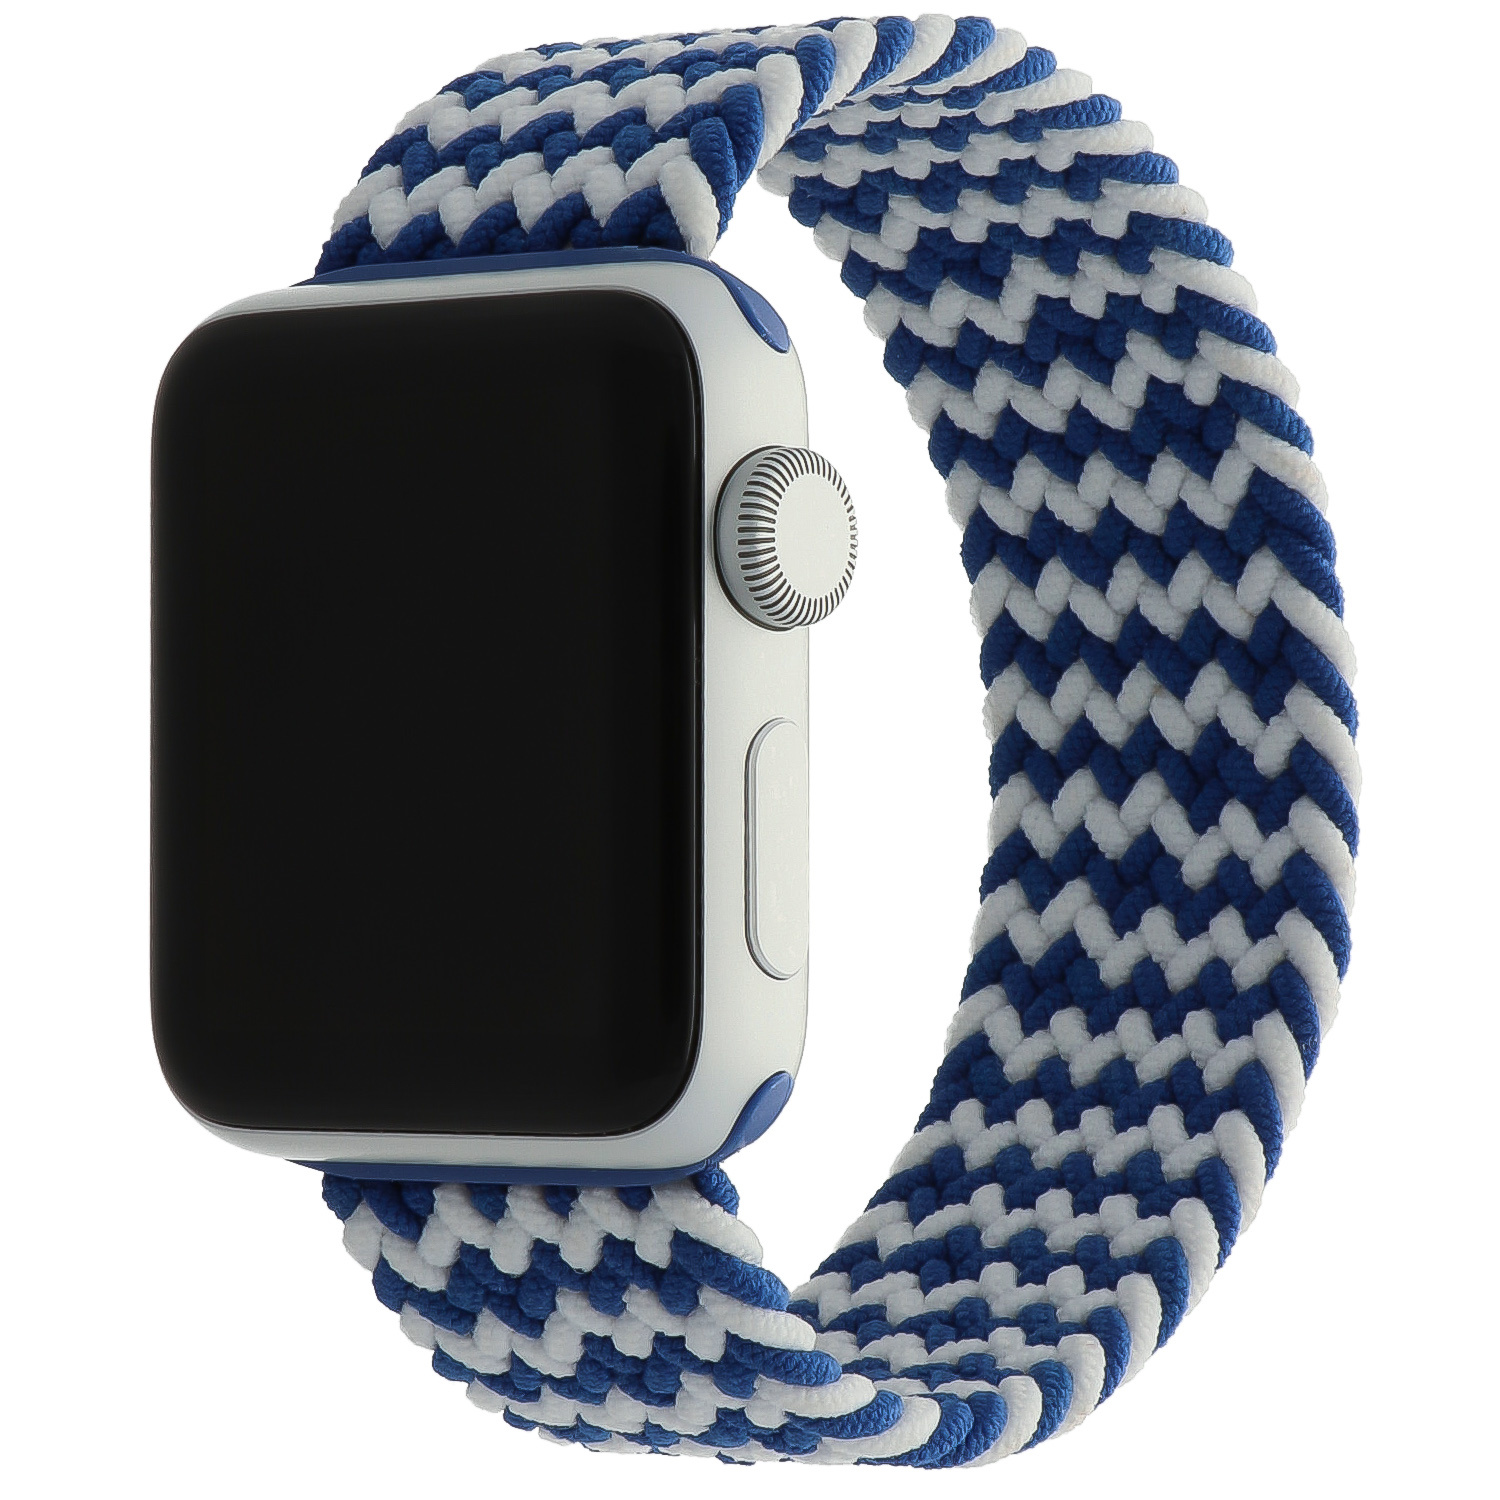 Apple Watch Nylon Braided Solo Loop Strap - Blue White Mix